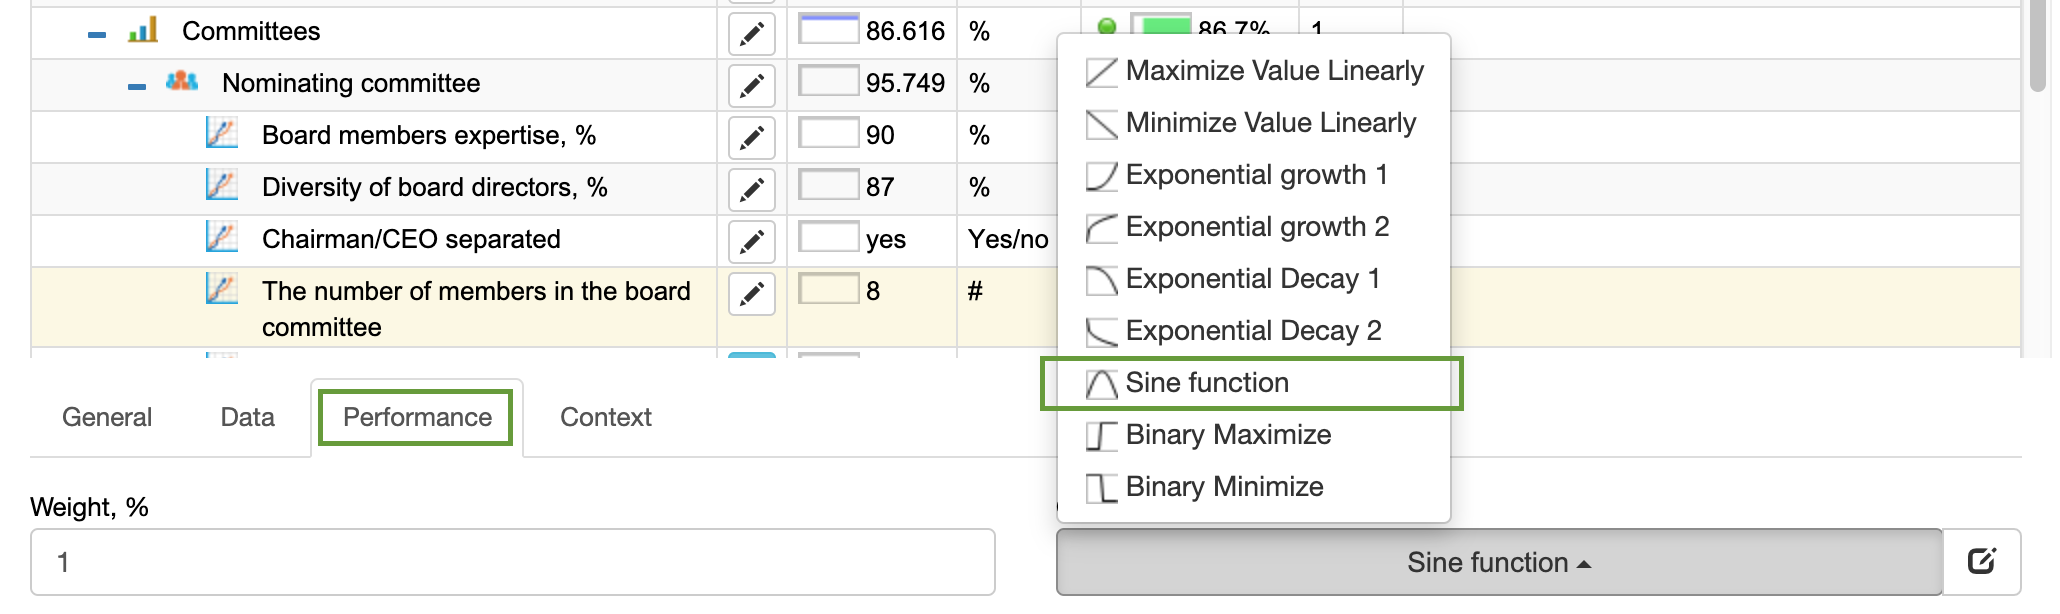 Committee number metric: example of performance function setup